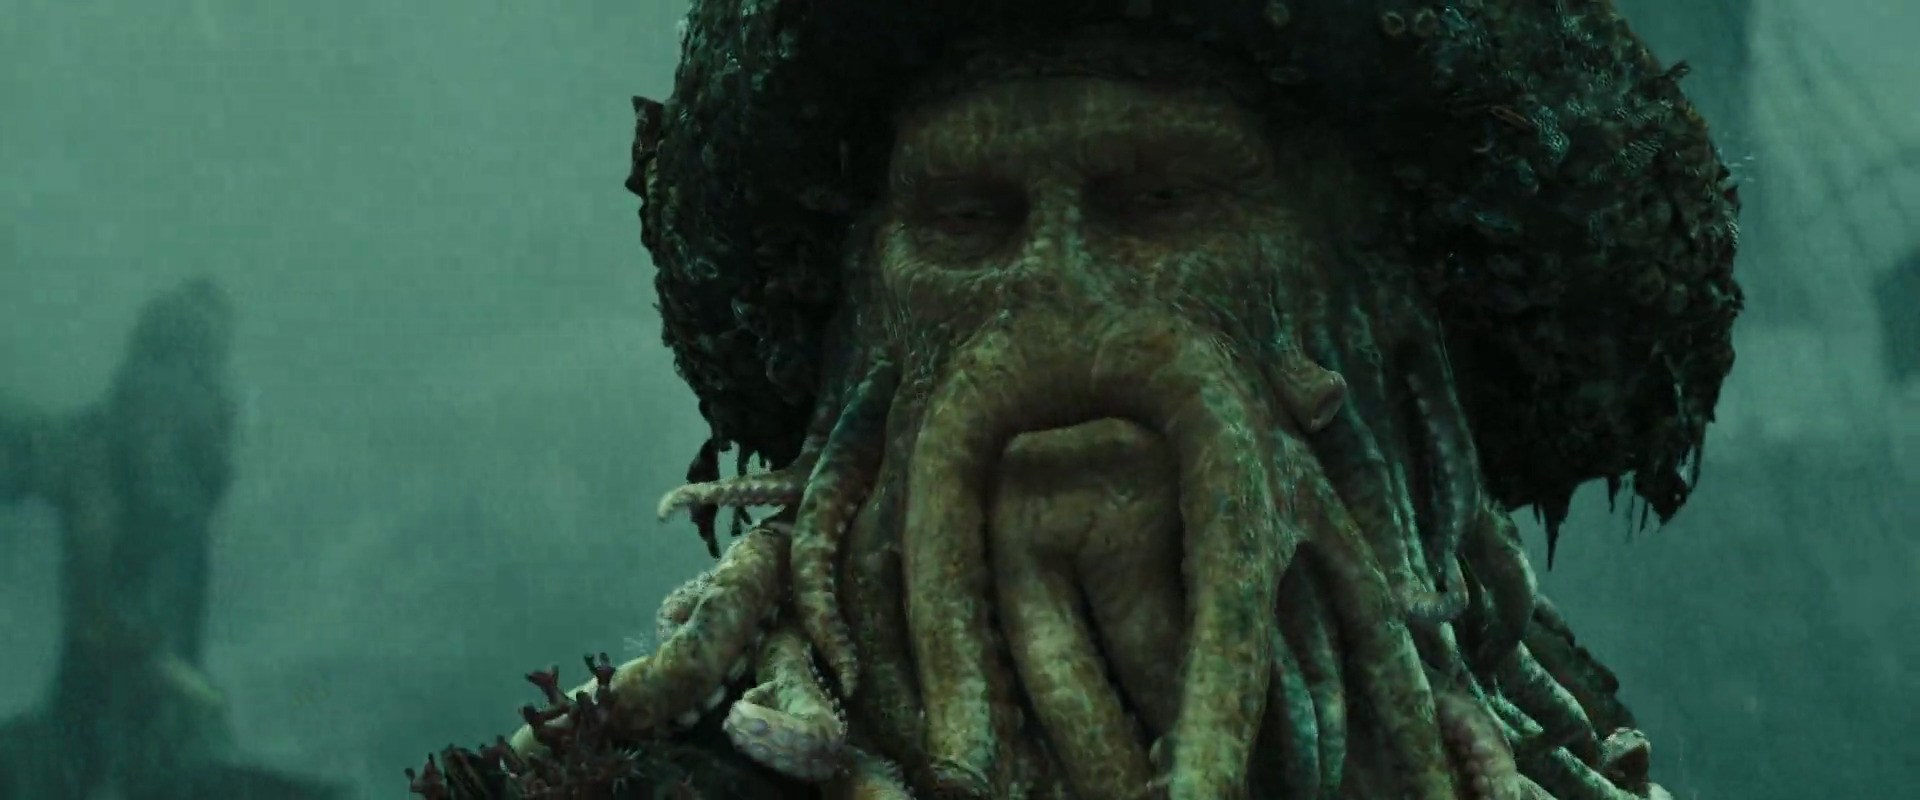 A Davy Jones Prequel Is The Best Way To Save Pirates of the Caribbean